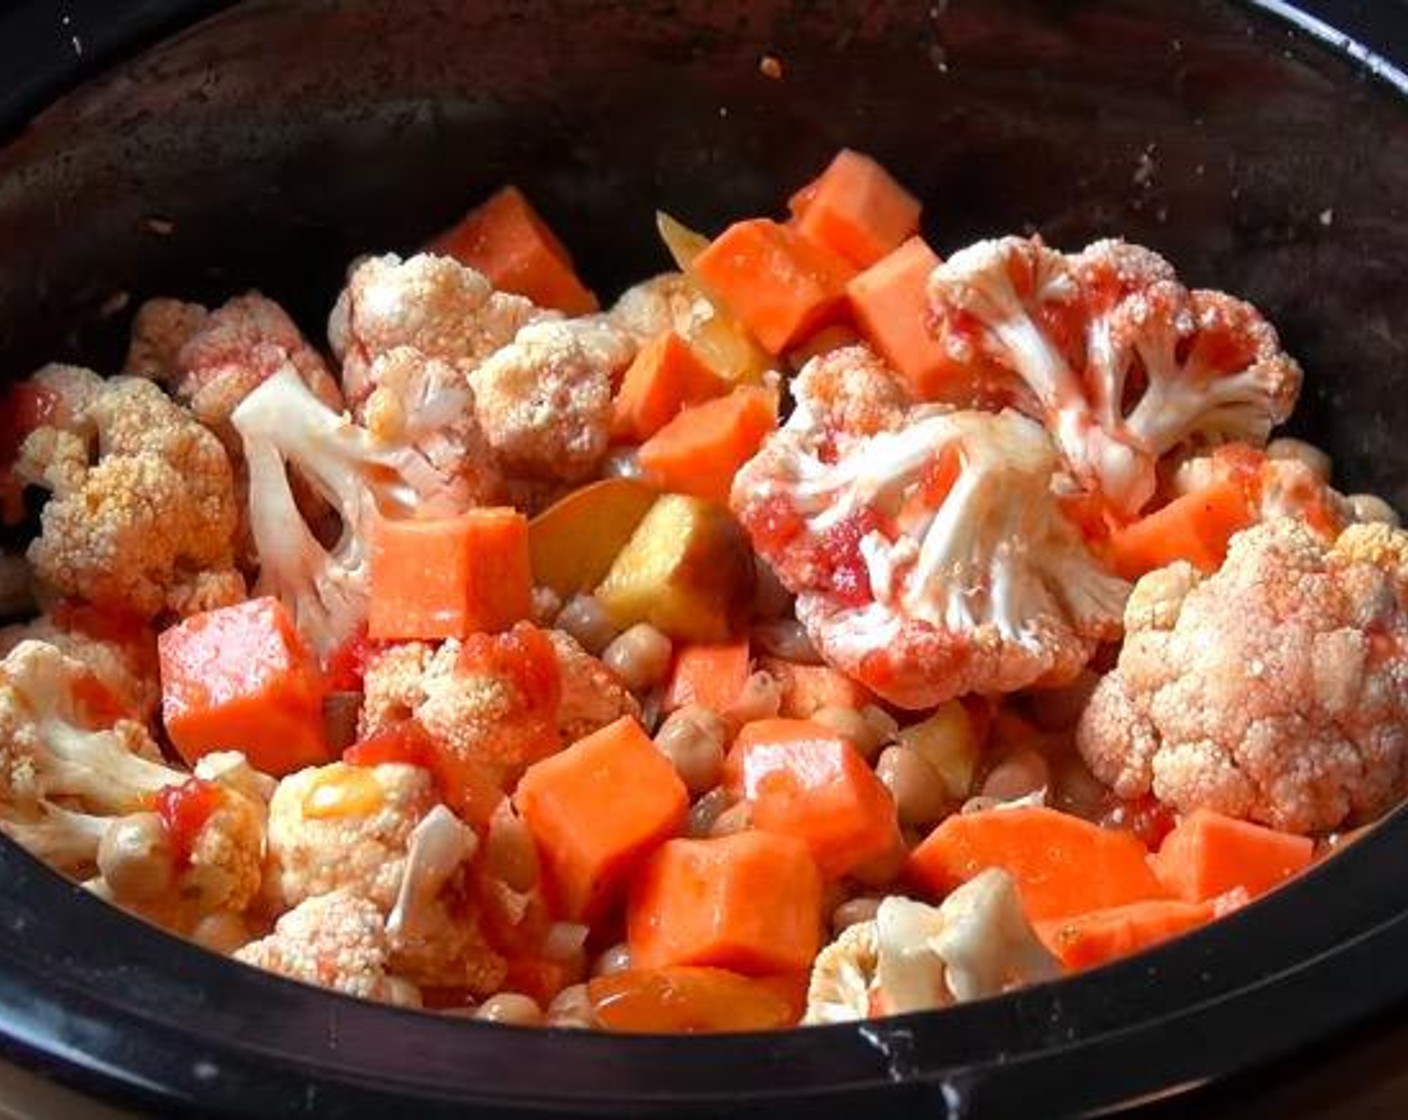 step 3 Transfer onion and apple mixture to slow cooker. Add Sweet Potatoes (1.3 lb), Cauliflower (3 3/4 cups) broken up into florets, Canned Chickpeas (4 1/4 cups), Canned Diced Tomatoes (1 3/4 cups) and Vegetable Stock (1 3/4 cups). Stir together.